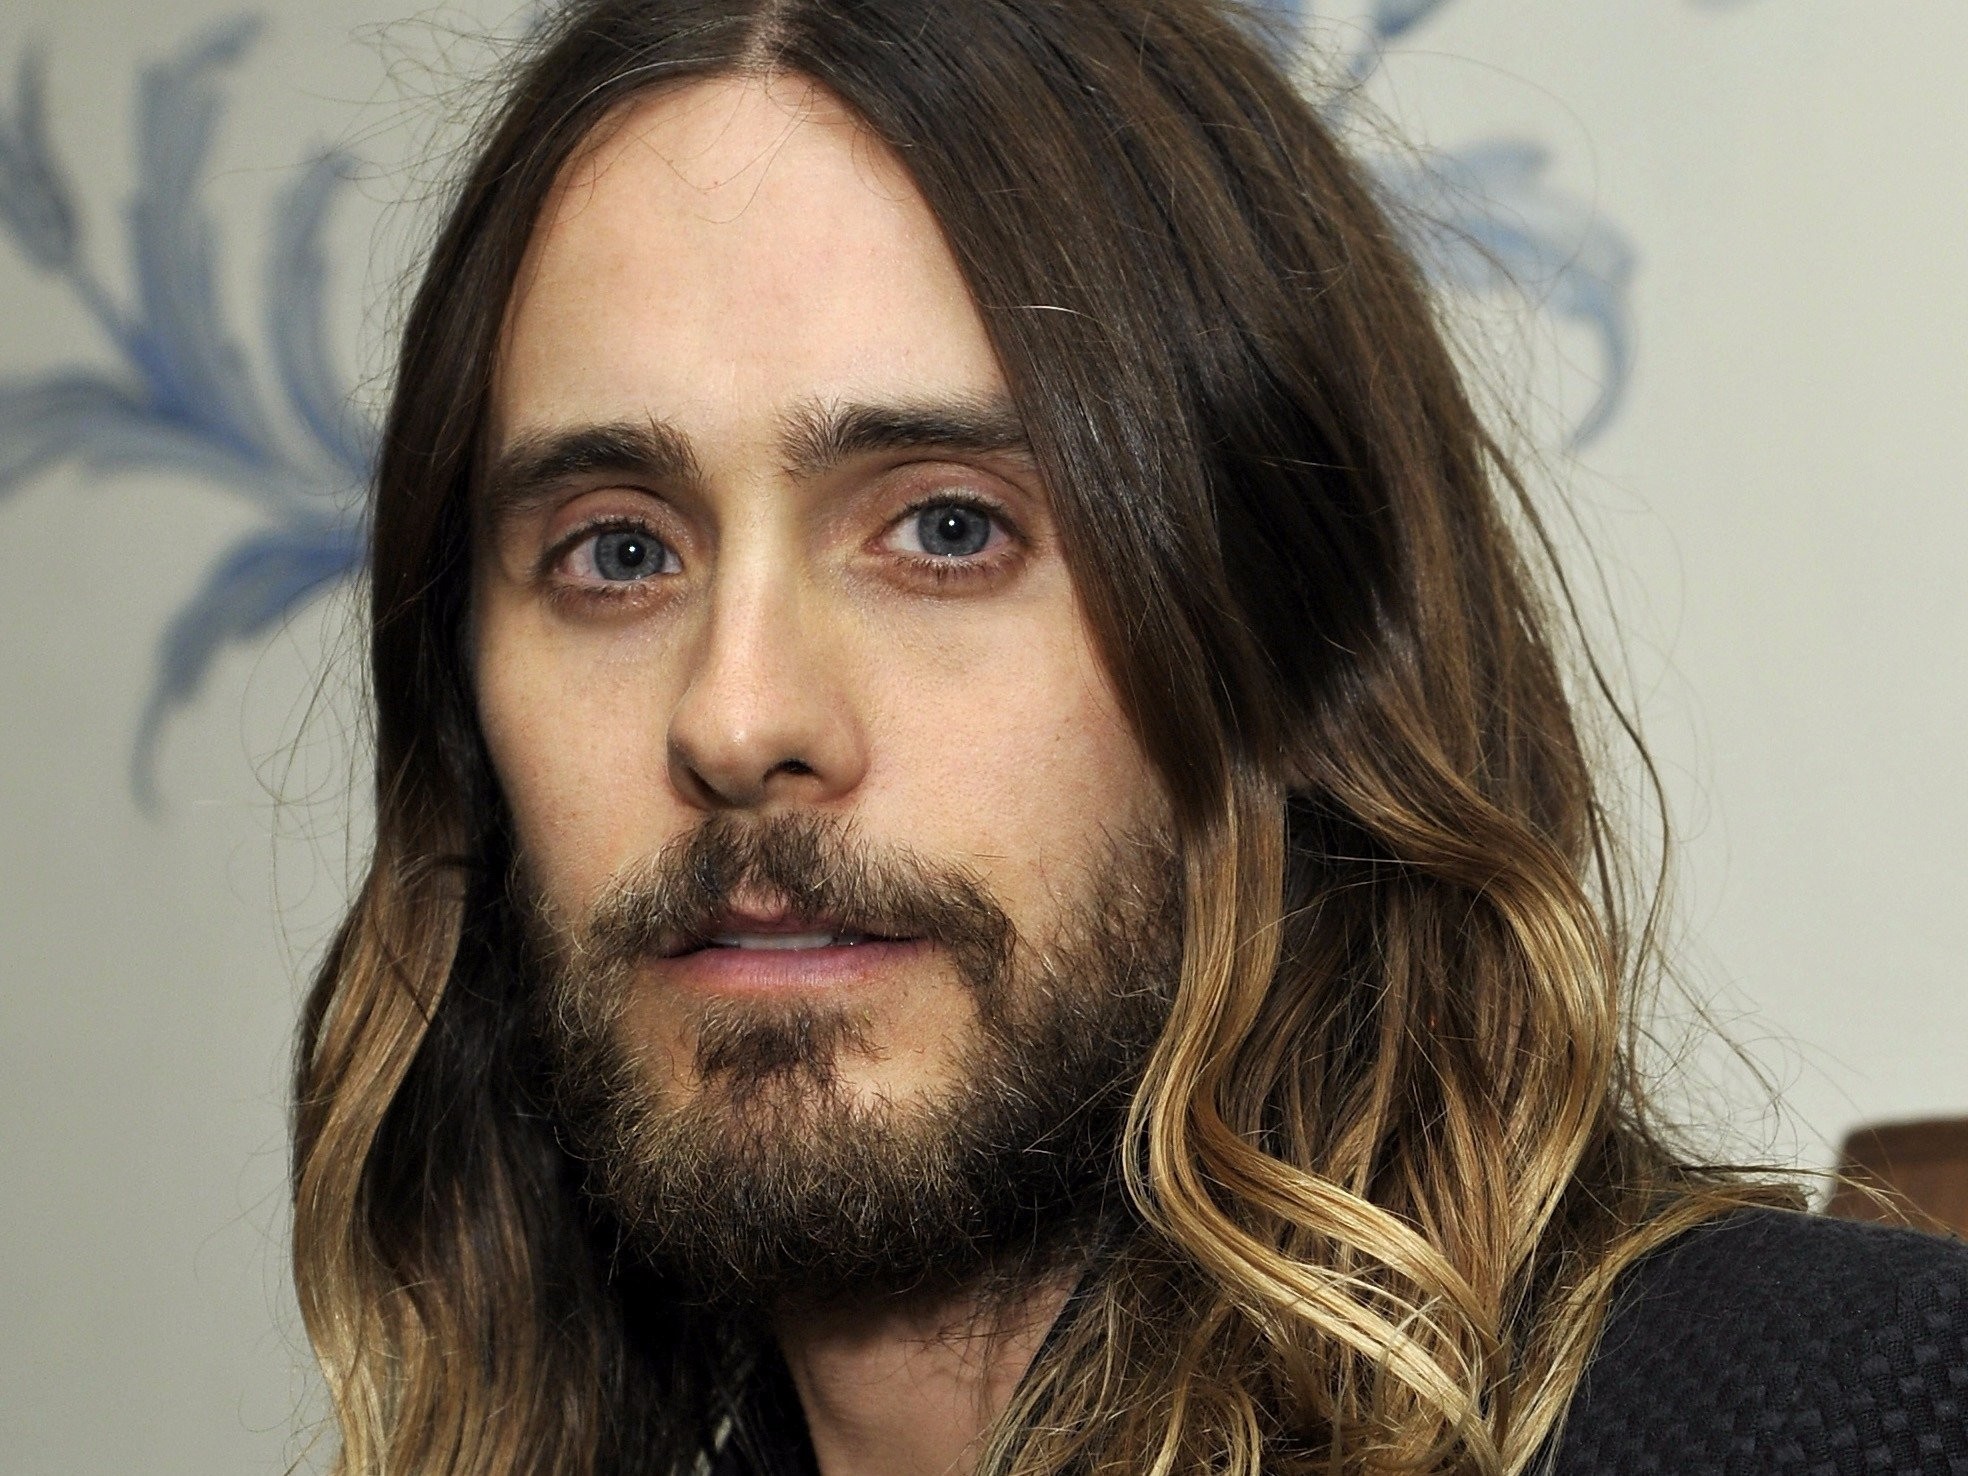 1968x1476 1920x1080 RMD:53 HD Jared Leto Wallpapers